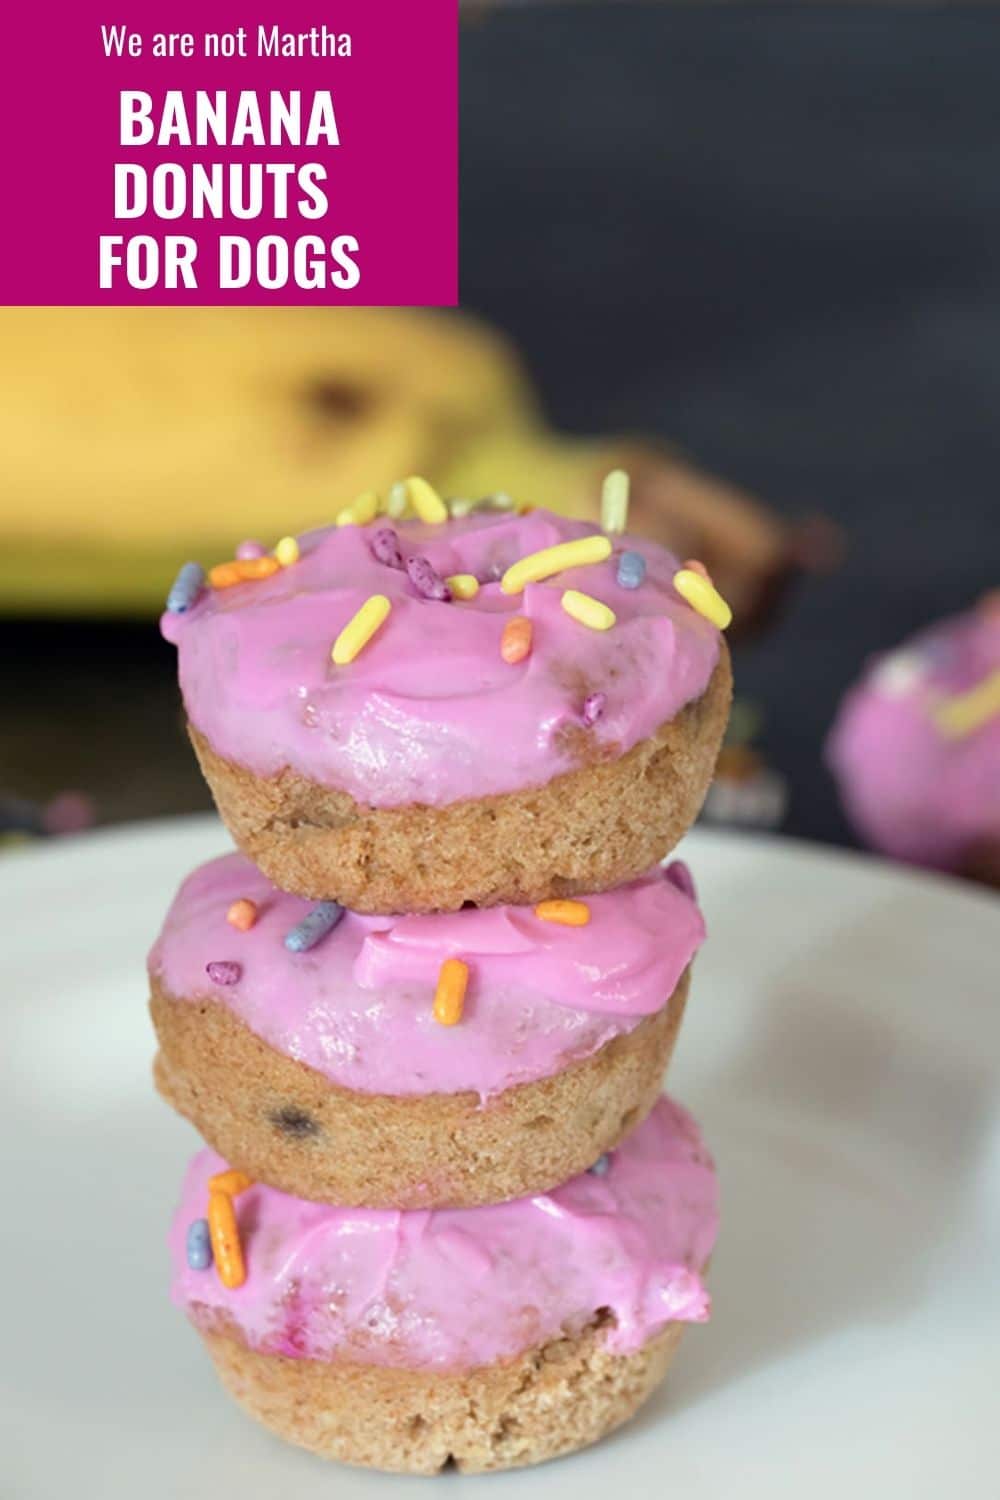 are donuts really that bad for dogs